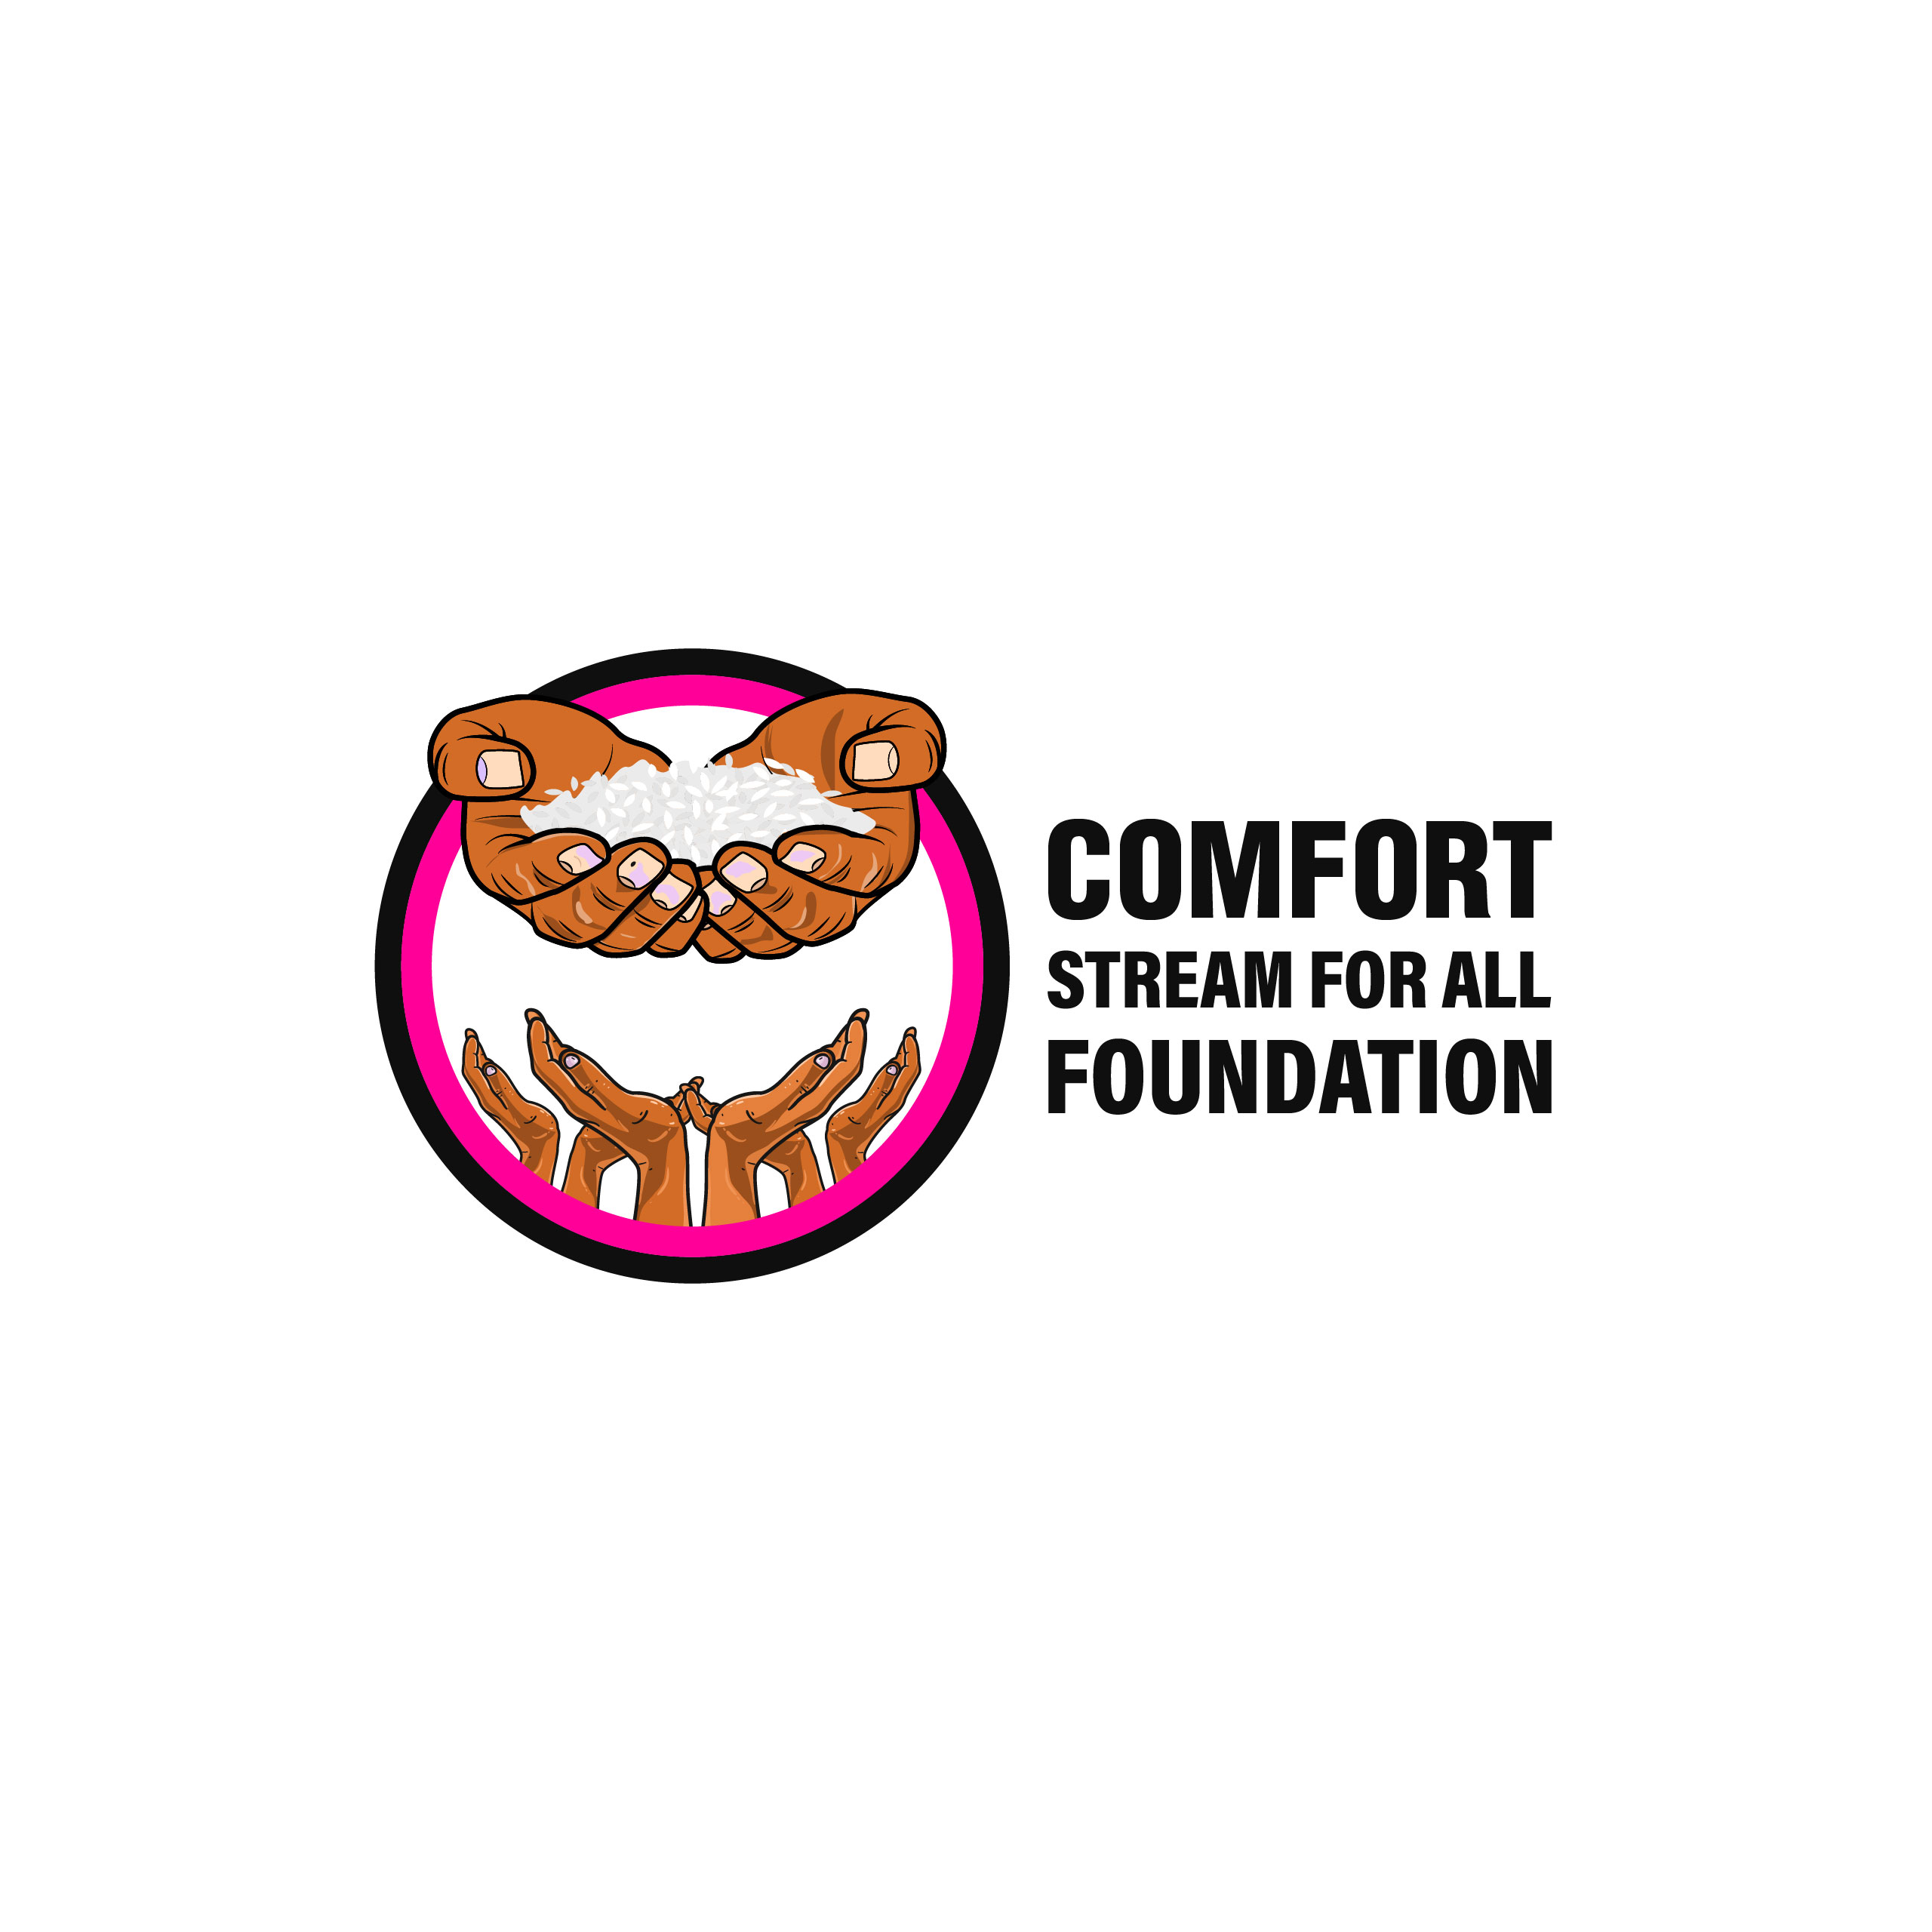 Comfort Stream For All Foundation